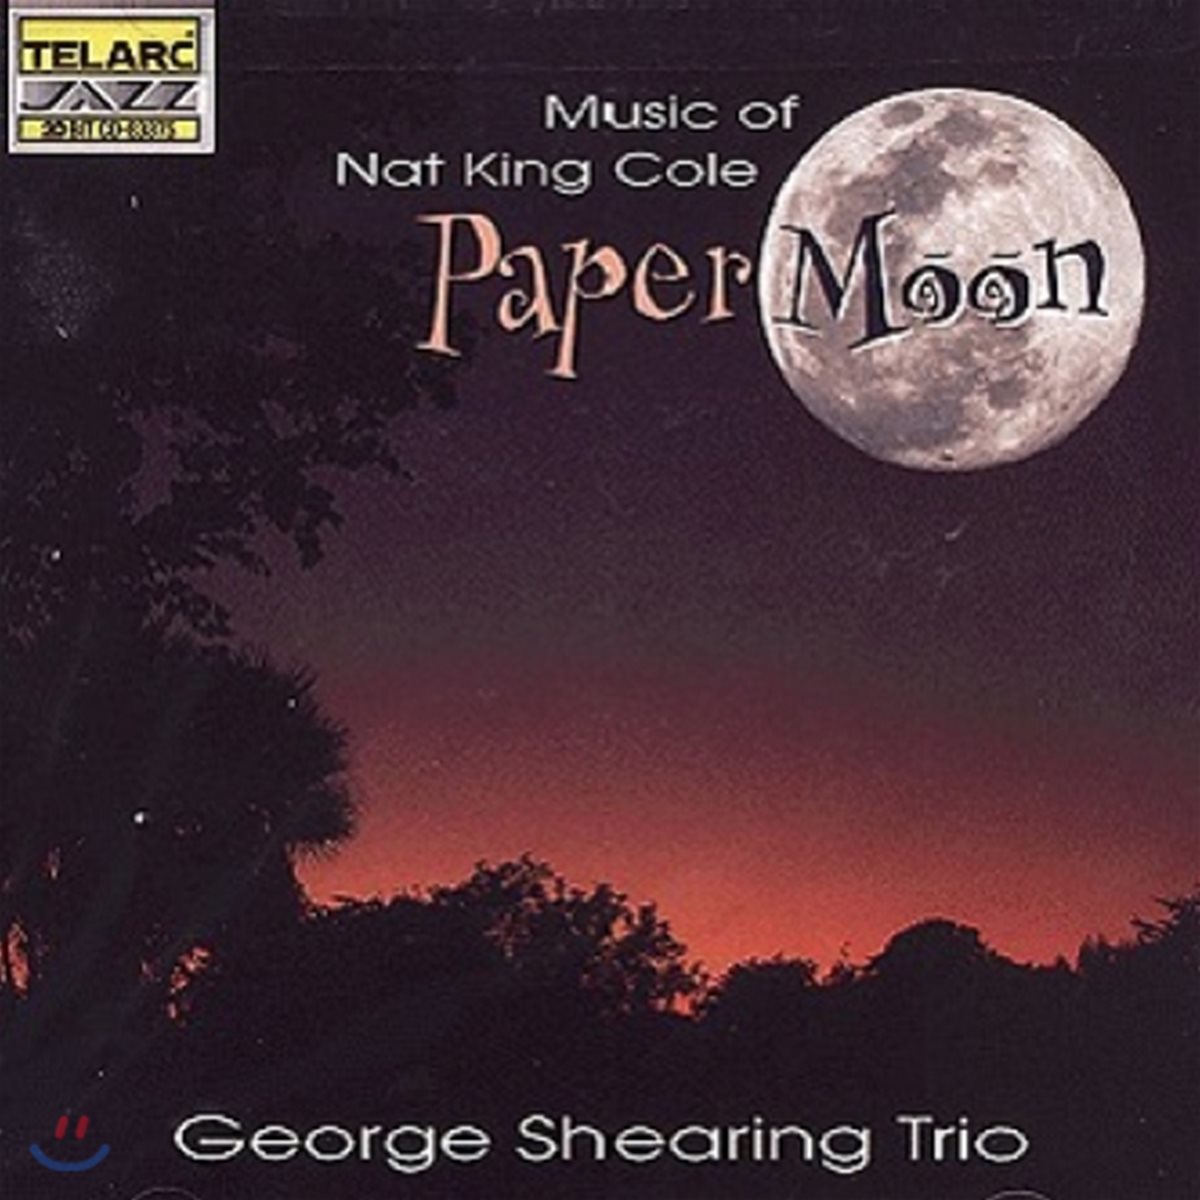 George Shearing Trio (조지 쉐링 트리오) - Paper Moon: Music Of Nat King Cole